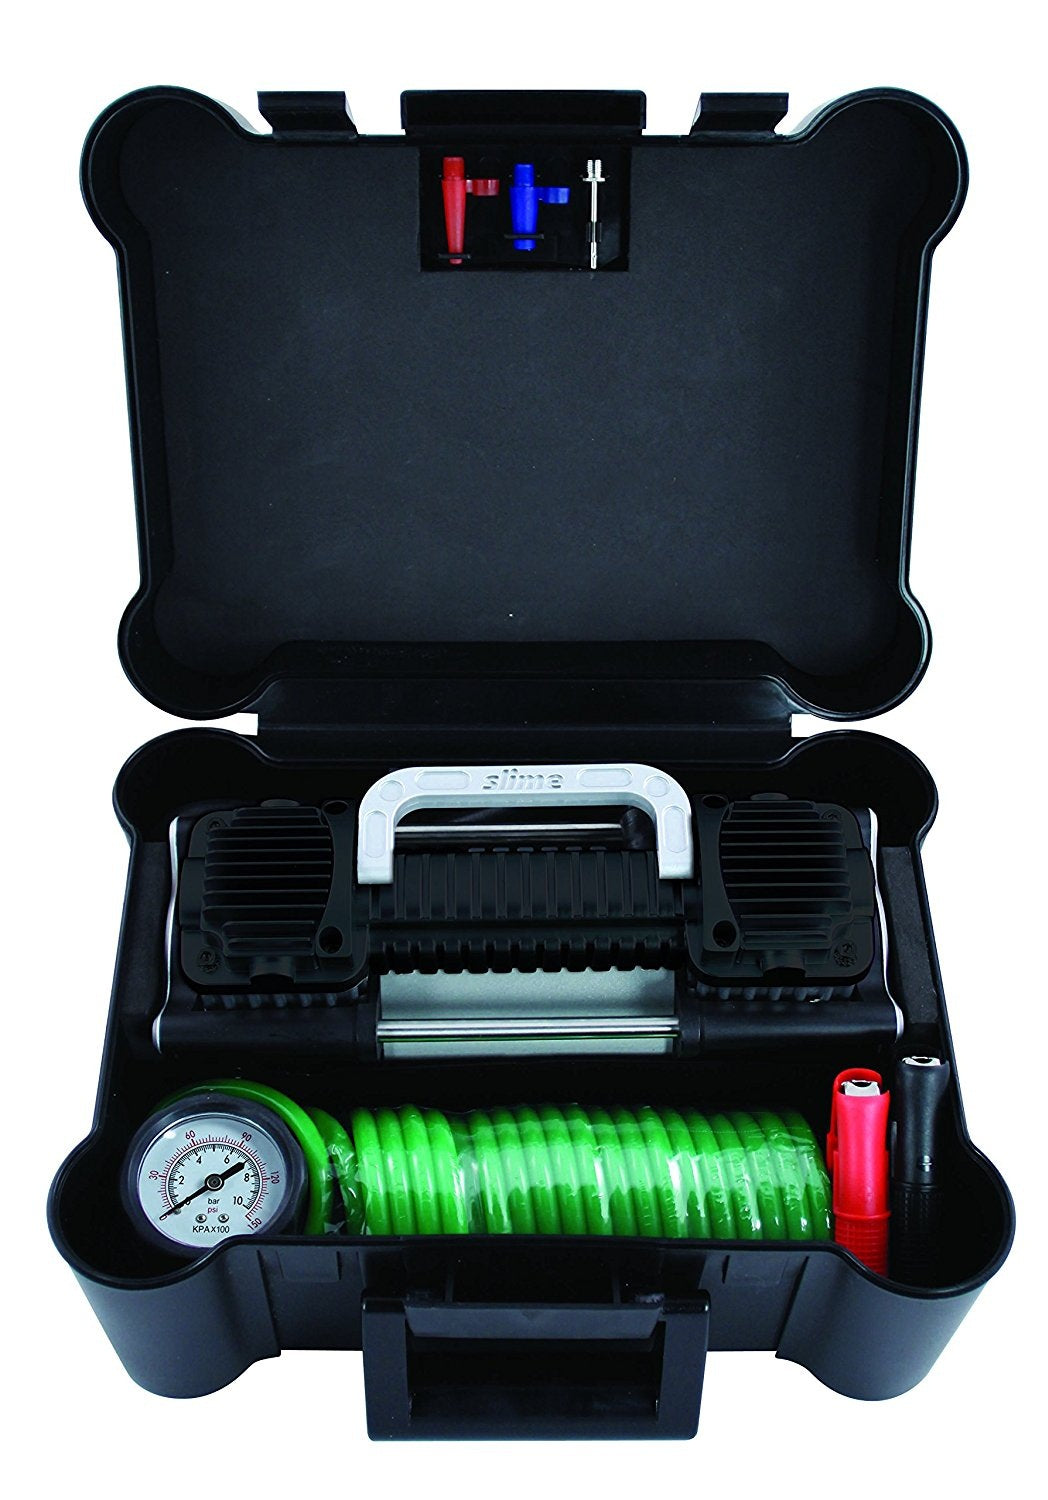 Buy slime 40026 2x heavy duty direct drive tire inflator - Online store for automotive, compressors / inflators in USA, on sale, low price, discount deals, coupon code